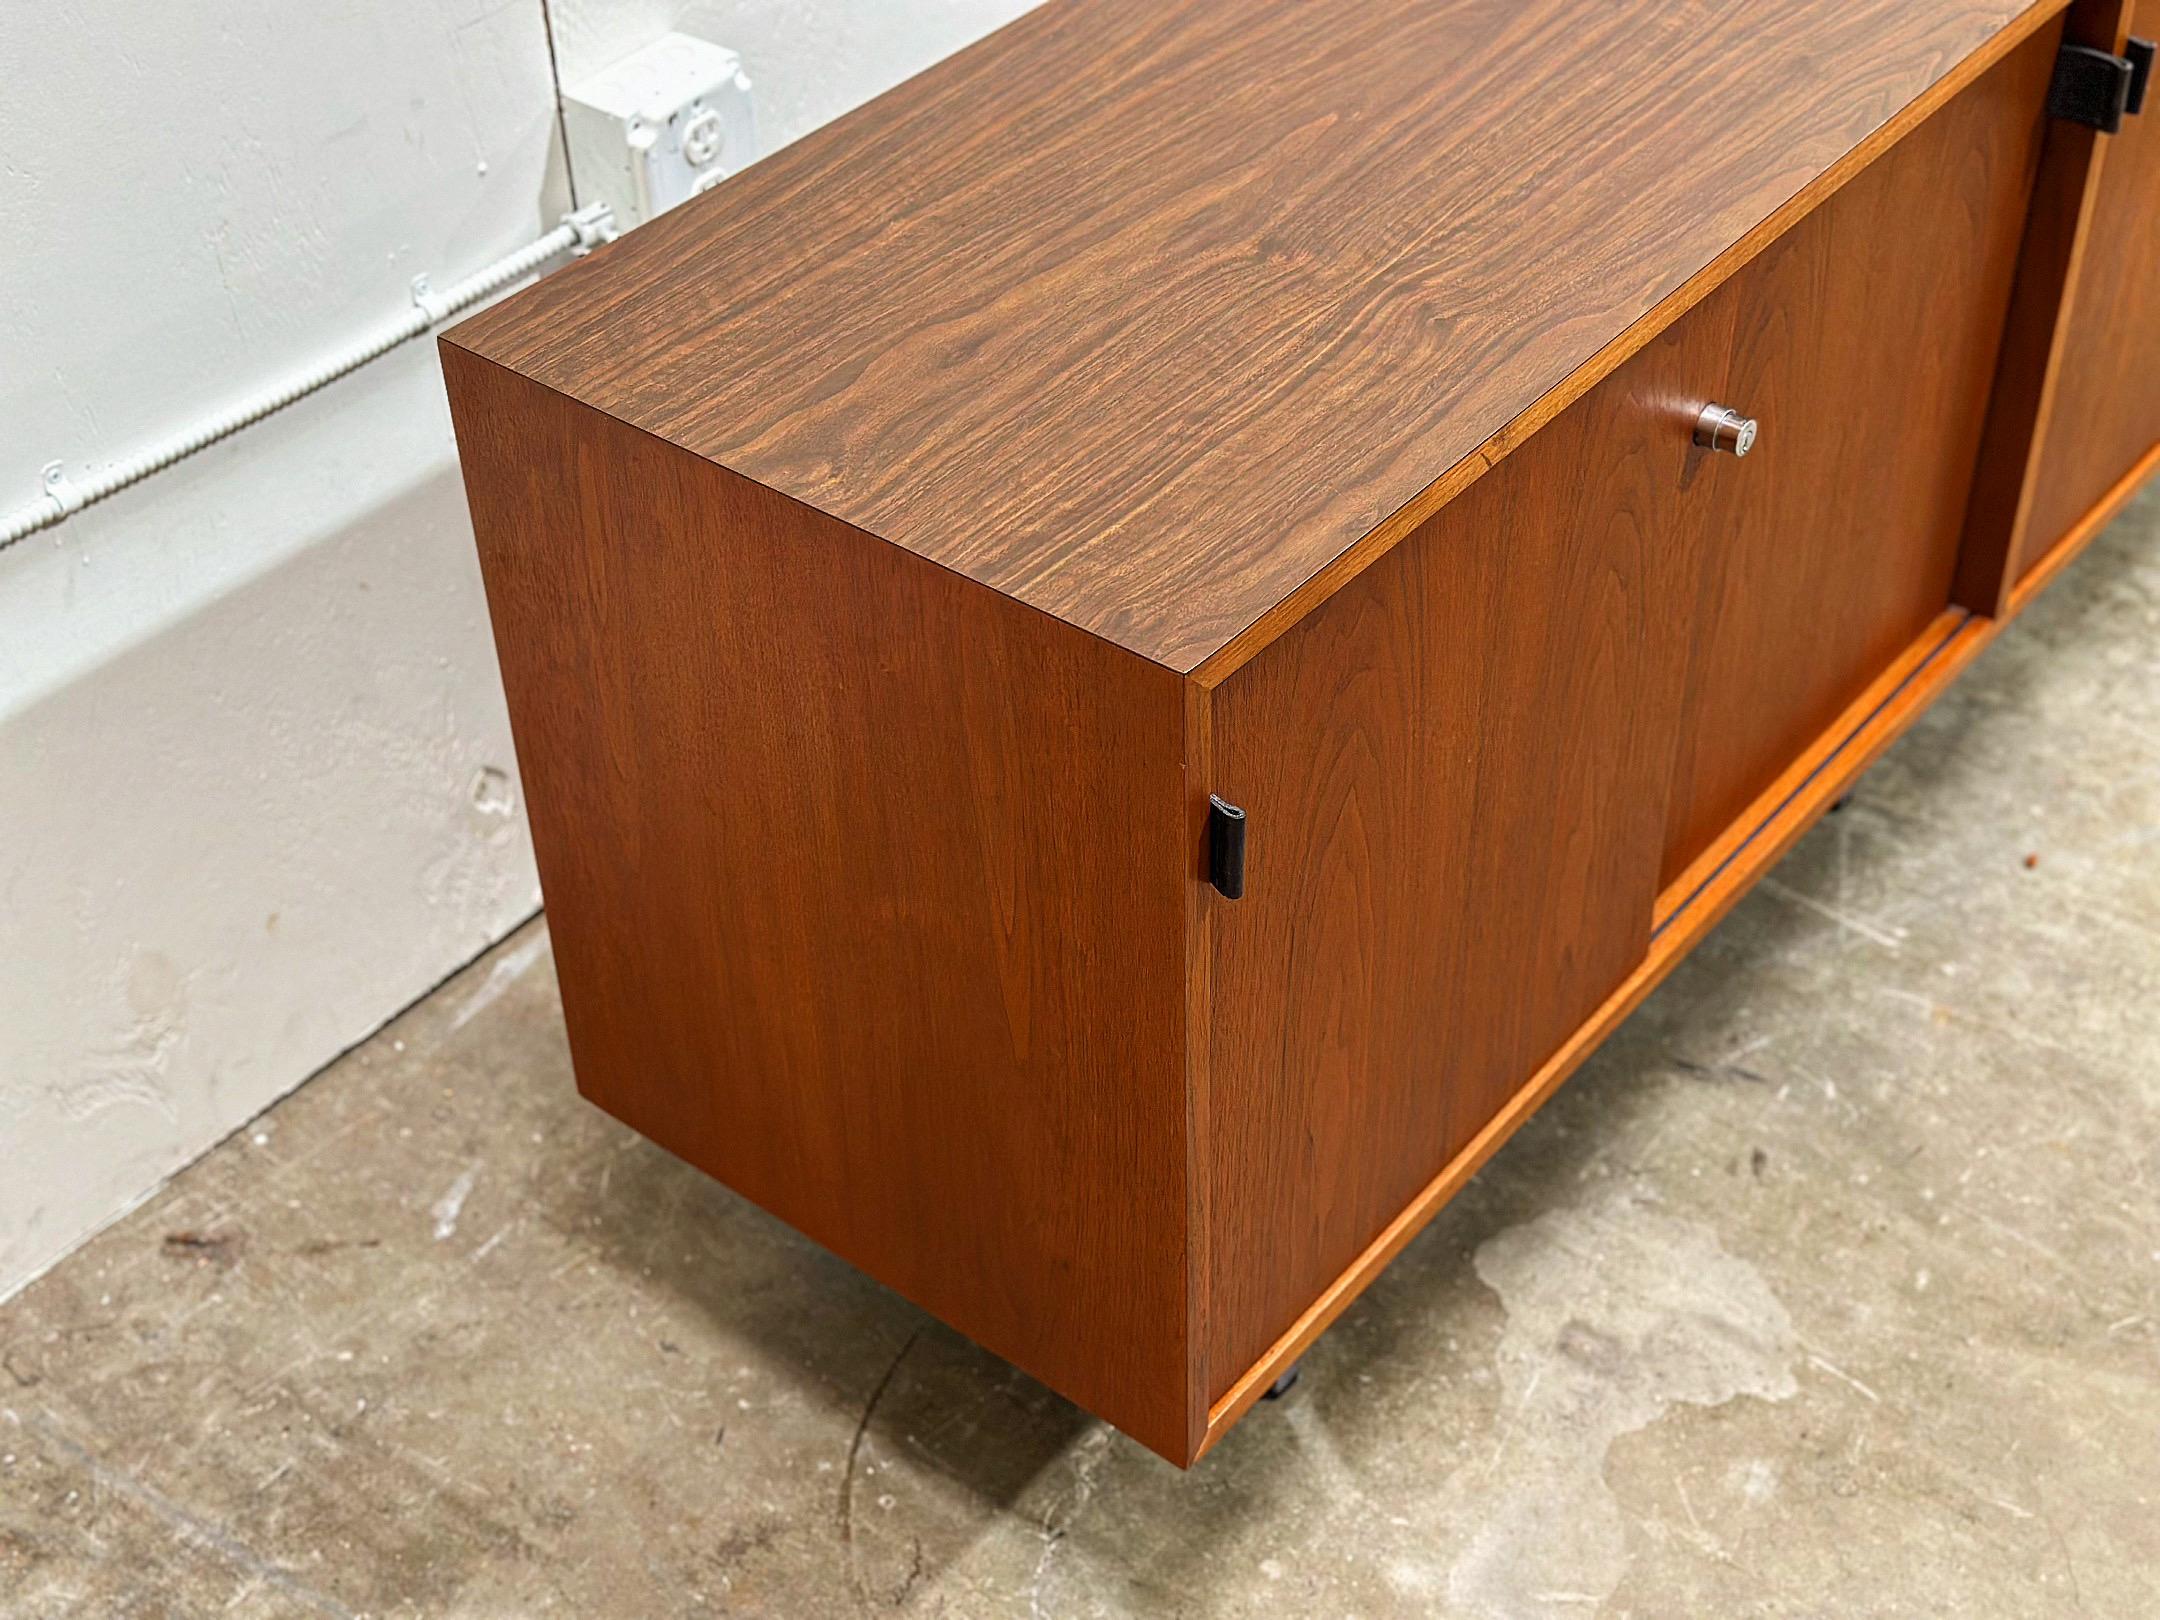 Vintage Midcentury Florence Knoll Credenza - Walnut + Chrome + Leather In Good Condition For Sale In Decatur, GA